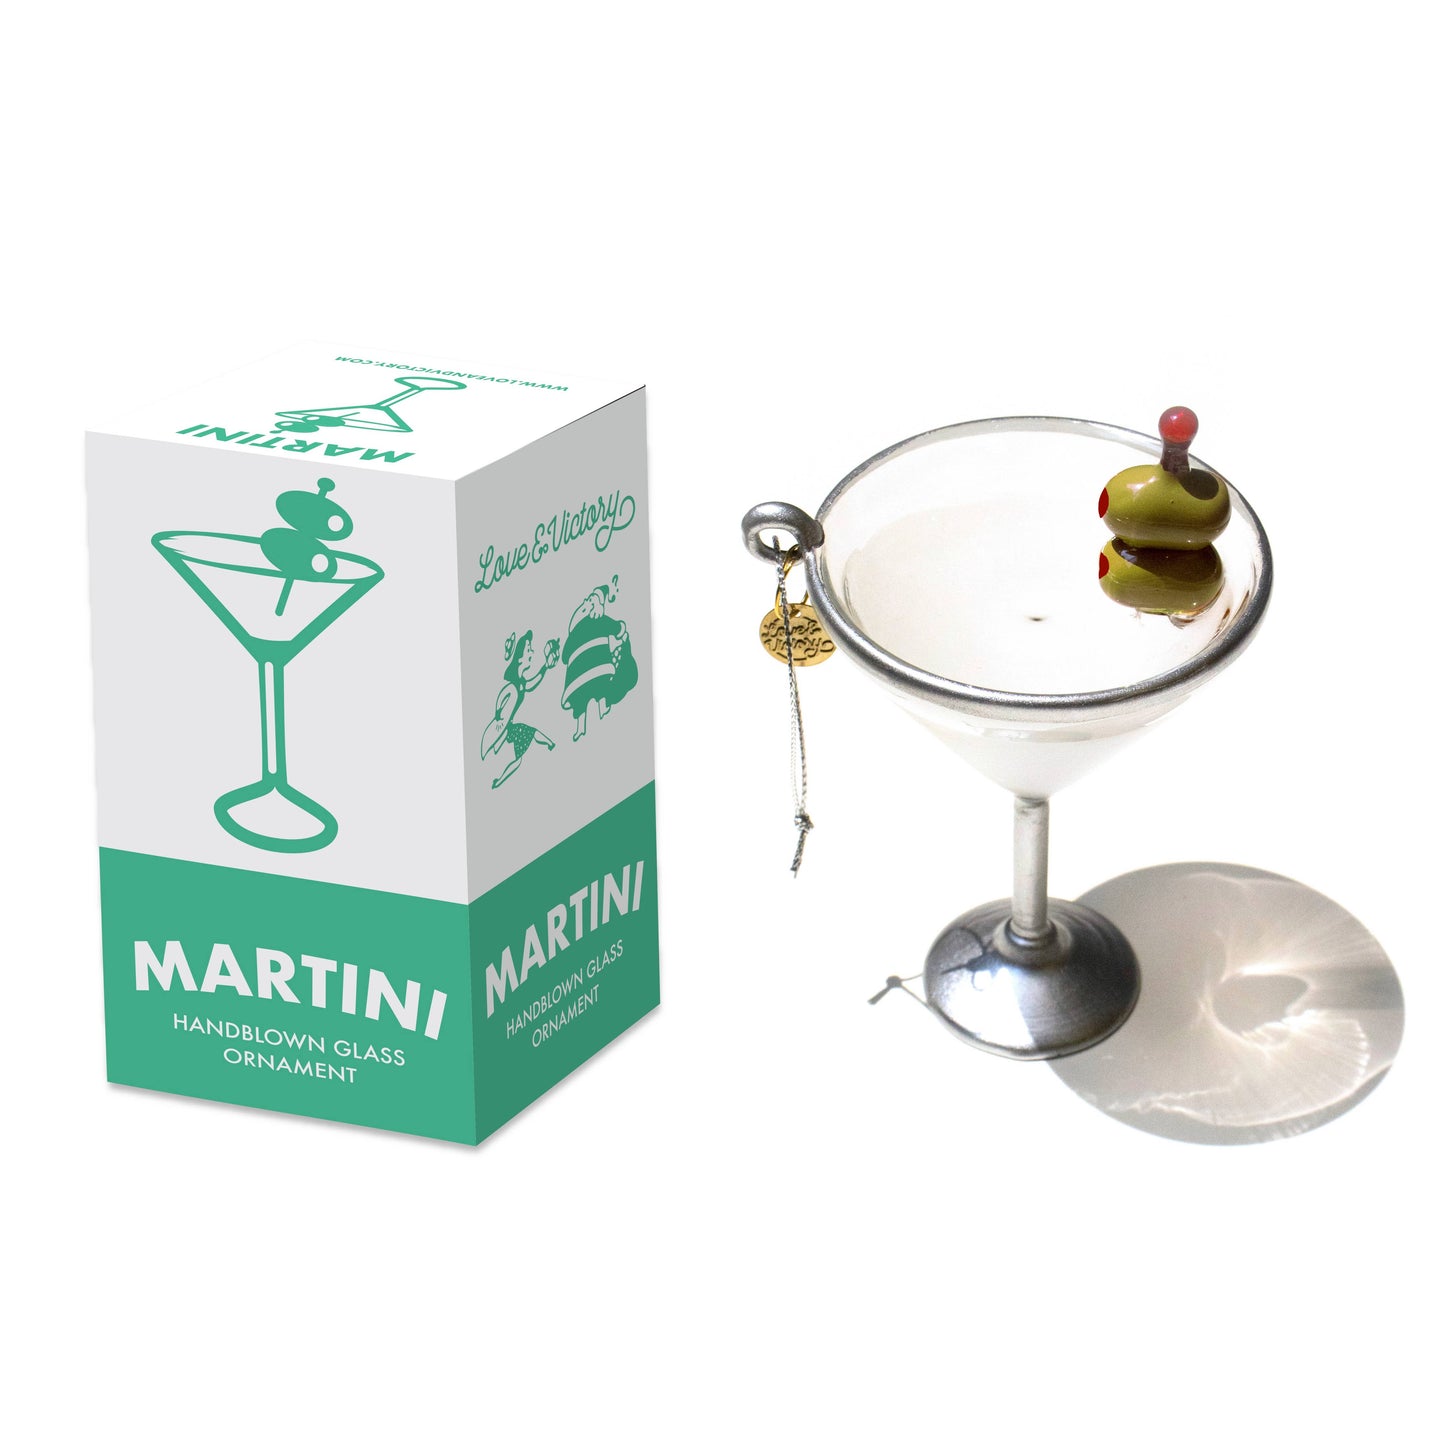 Hand blown glass martini ornament with display box.